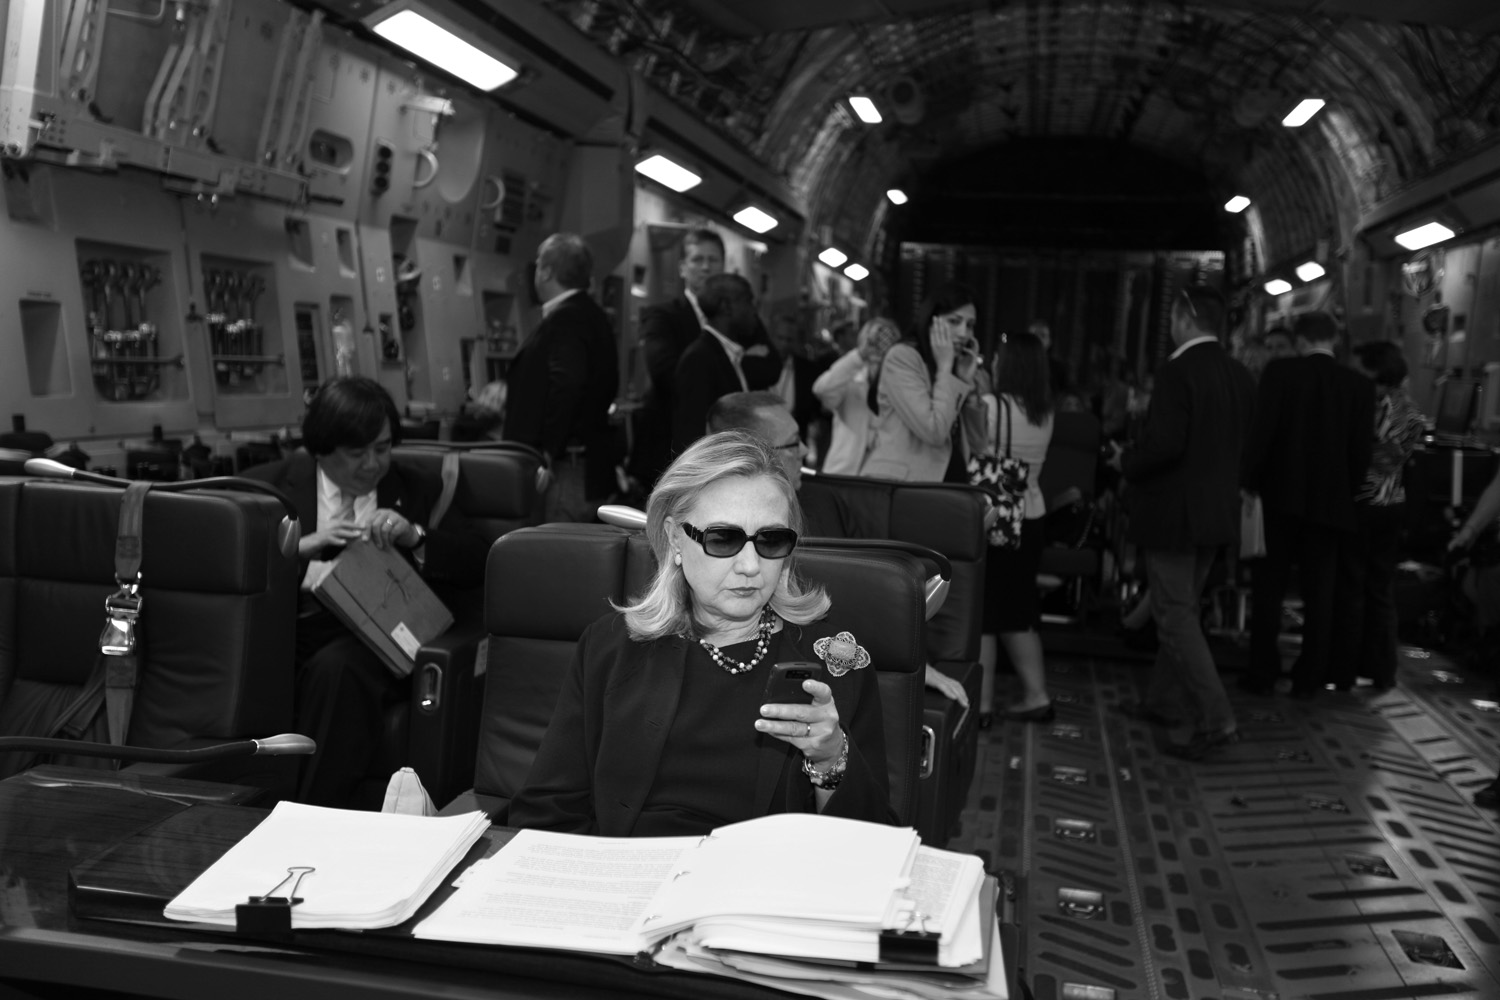 Diana Walker. From  Hillary Clinton; the Rise of Smart Power . November 7, 2011 issue (cover story).
                              Hillary Clinton checks her PDA in sunglasses upon departure in a military plane from Malta bound for Tripoli, on October 18, 2011.